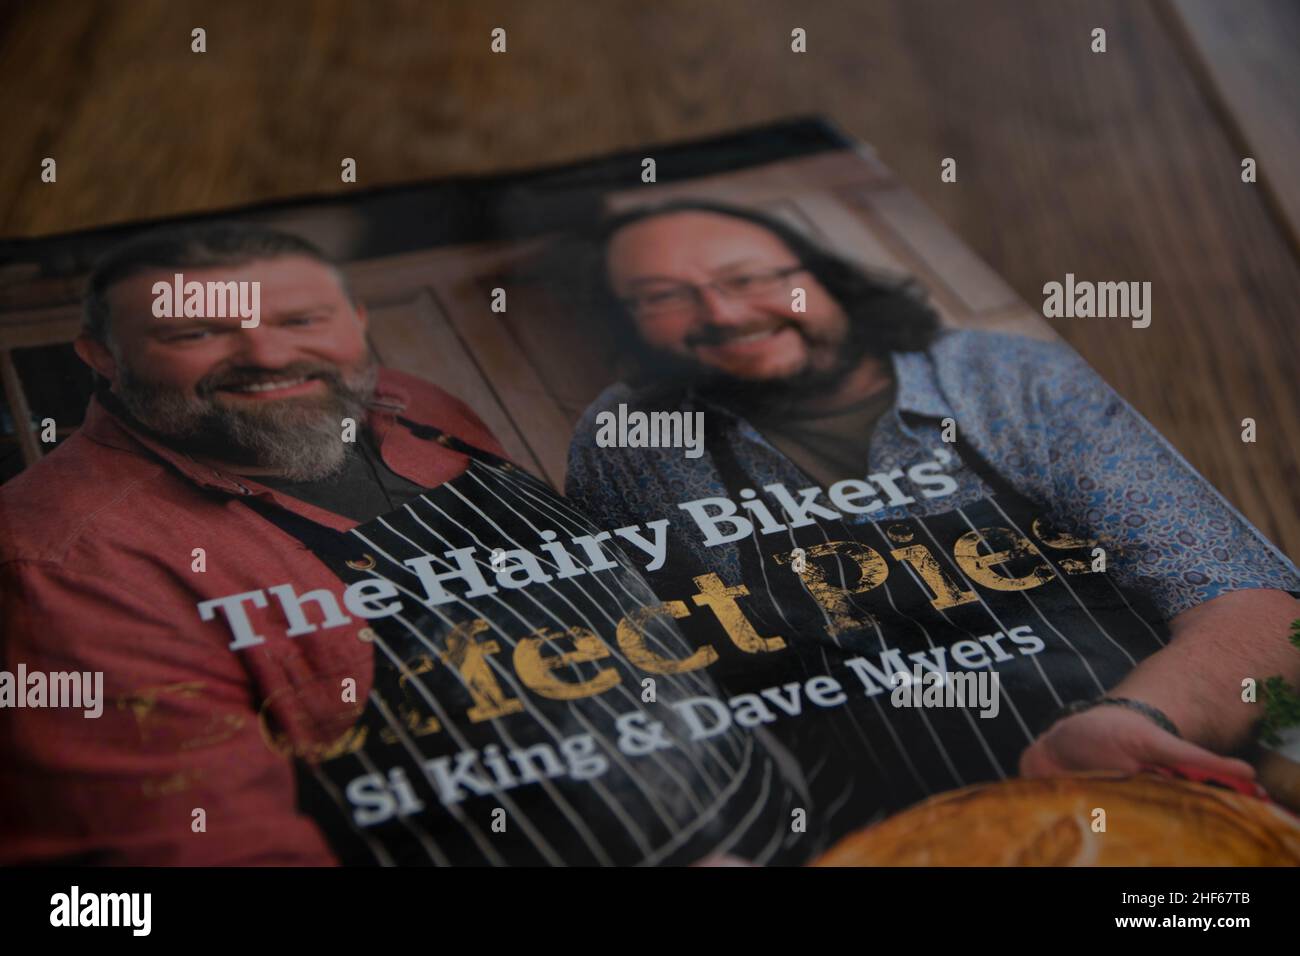 Durham, UK - 20 Nov 2020: Si King and David Myers Perfect Pies cookbook by the Hairy Bikers. Celeb chefs teach how to cook real pub grub food classics Stock Photo